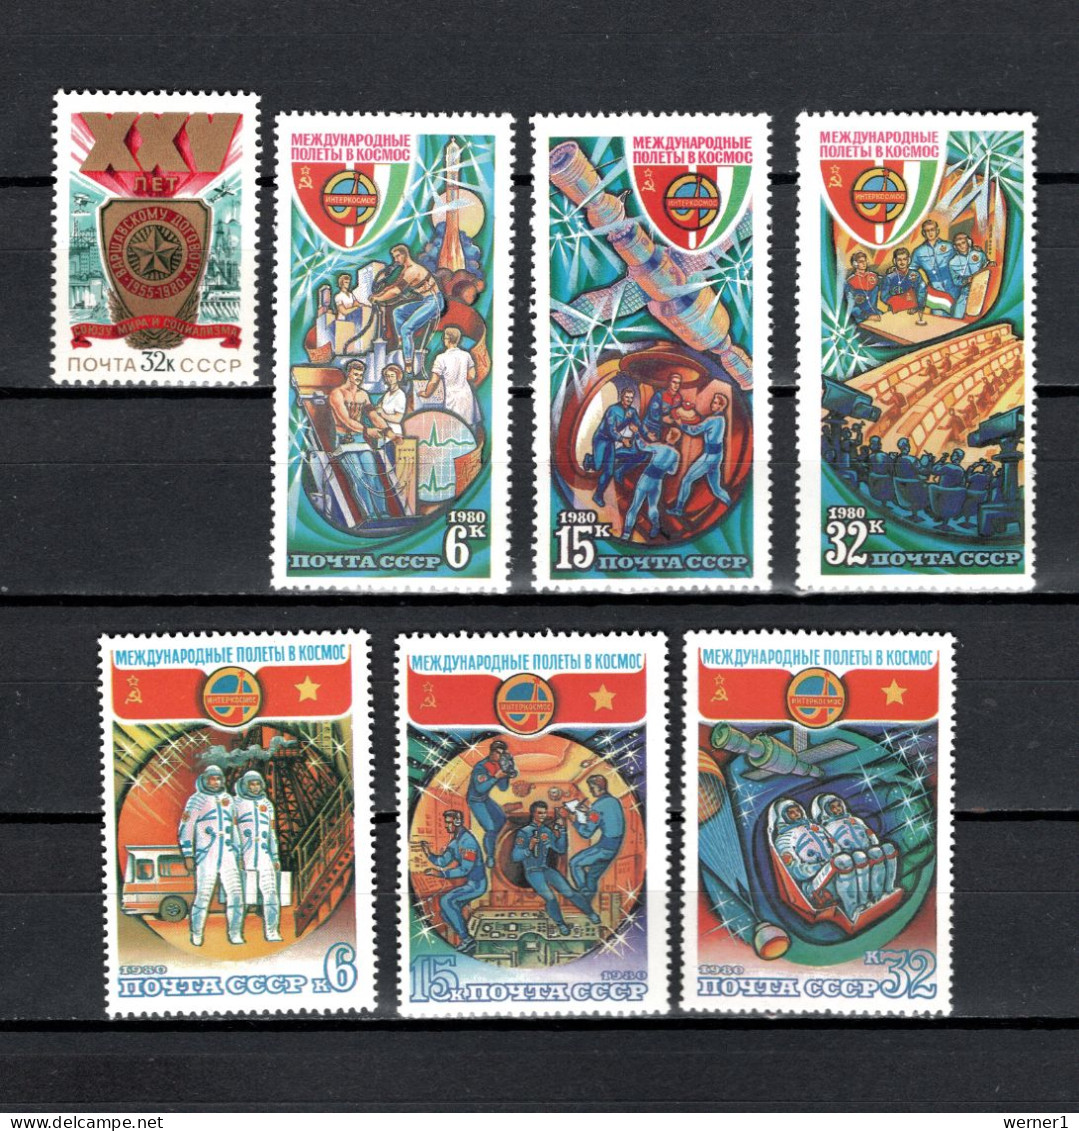 USSR Russia 1980 Space, Warsaw Treaty, Interkosmos 7 Stamps MNH - UdSSR